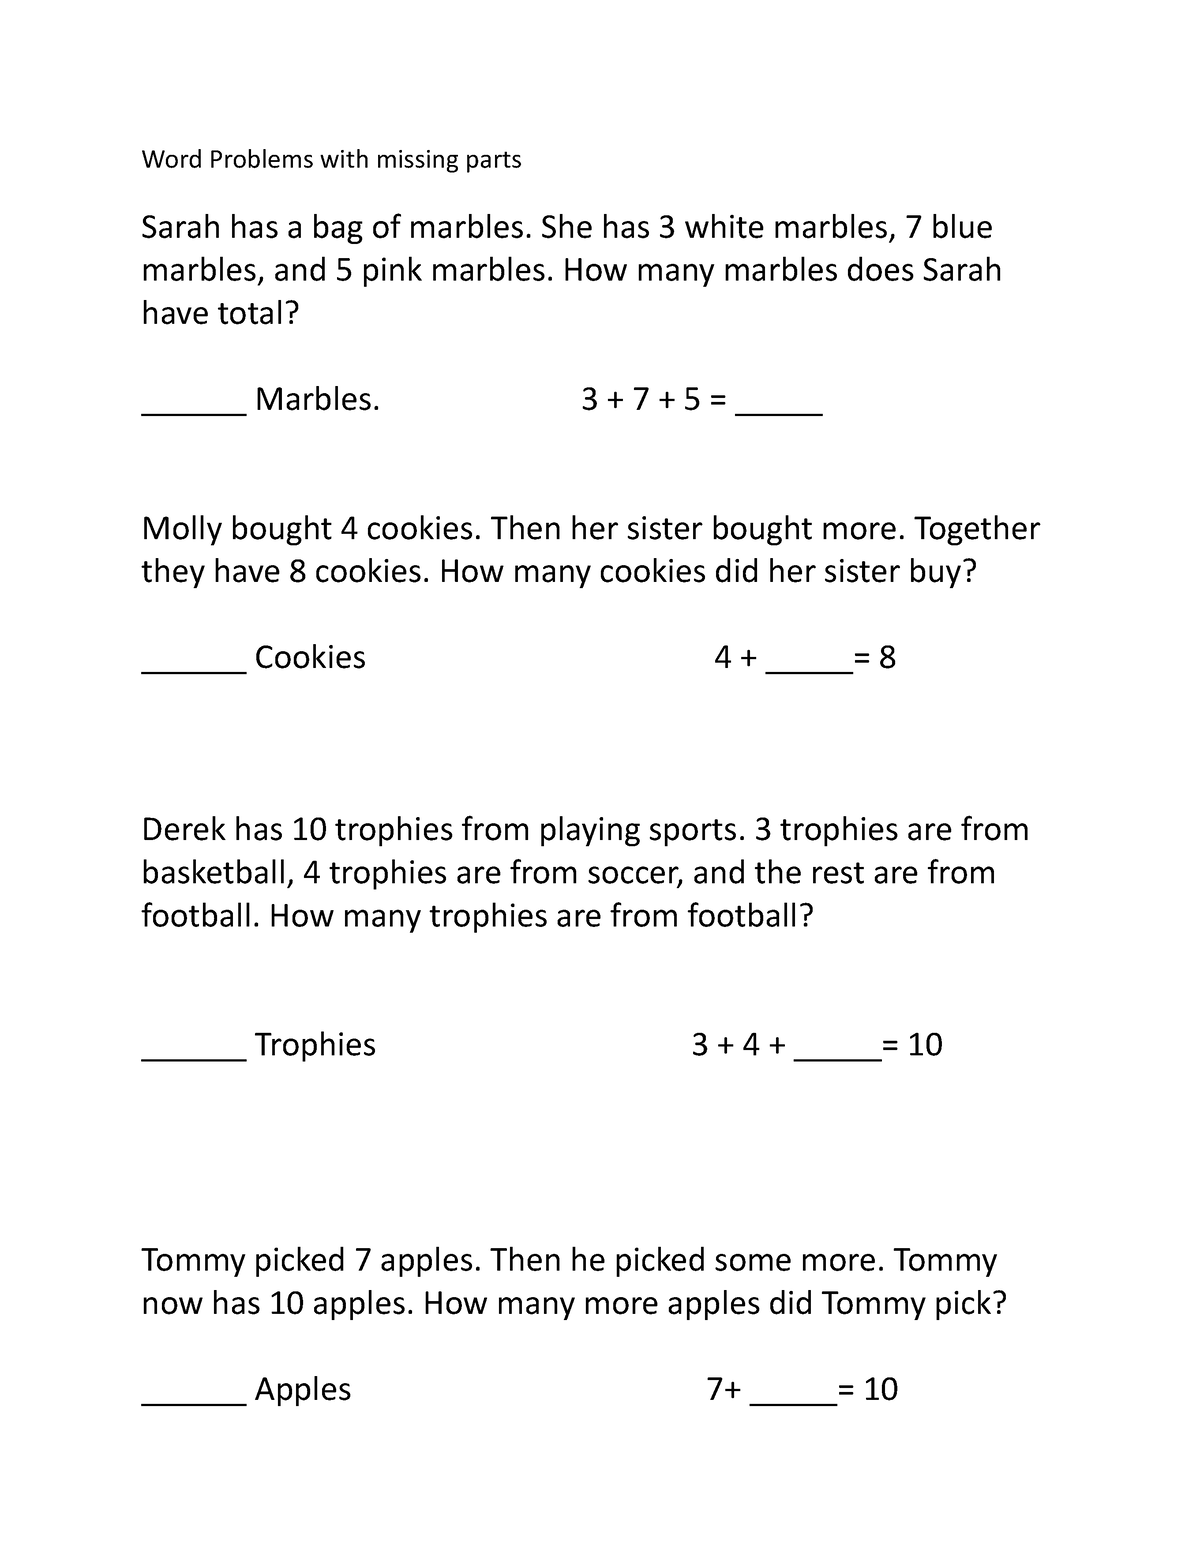 math-questions-for-lesson-plans-word-problems-with-missing-parts